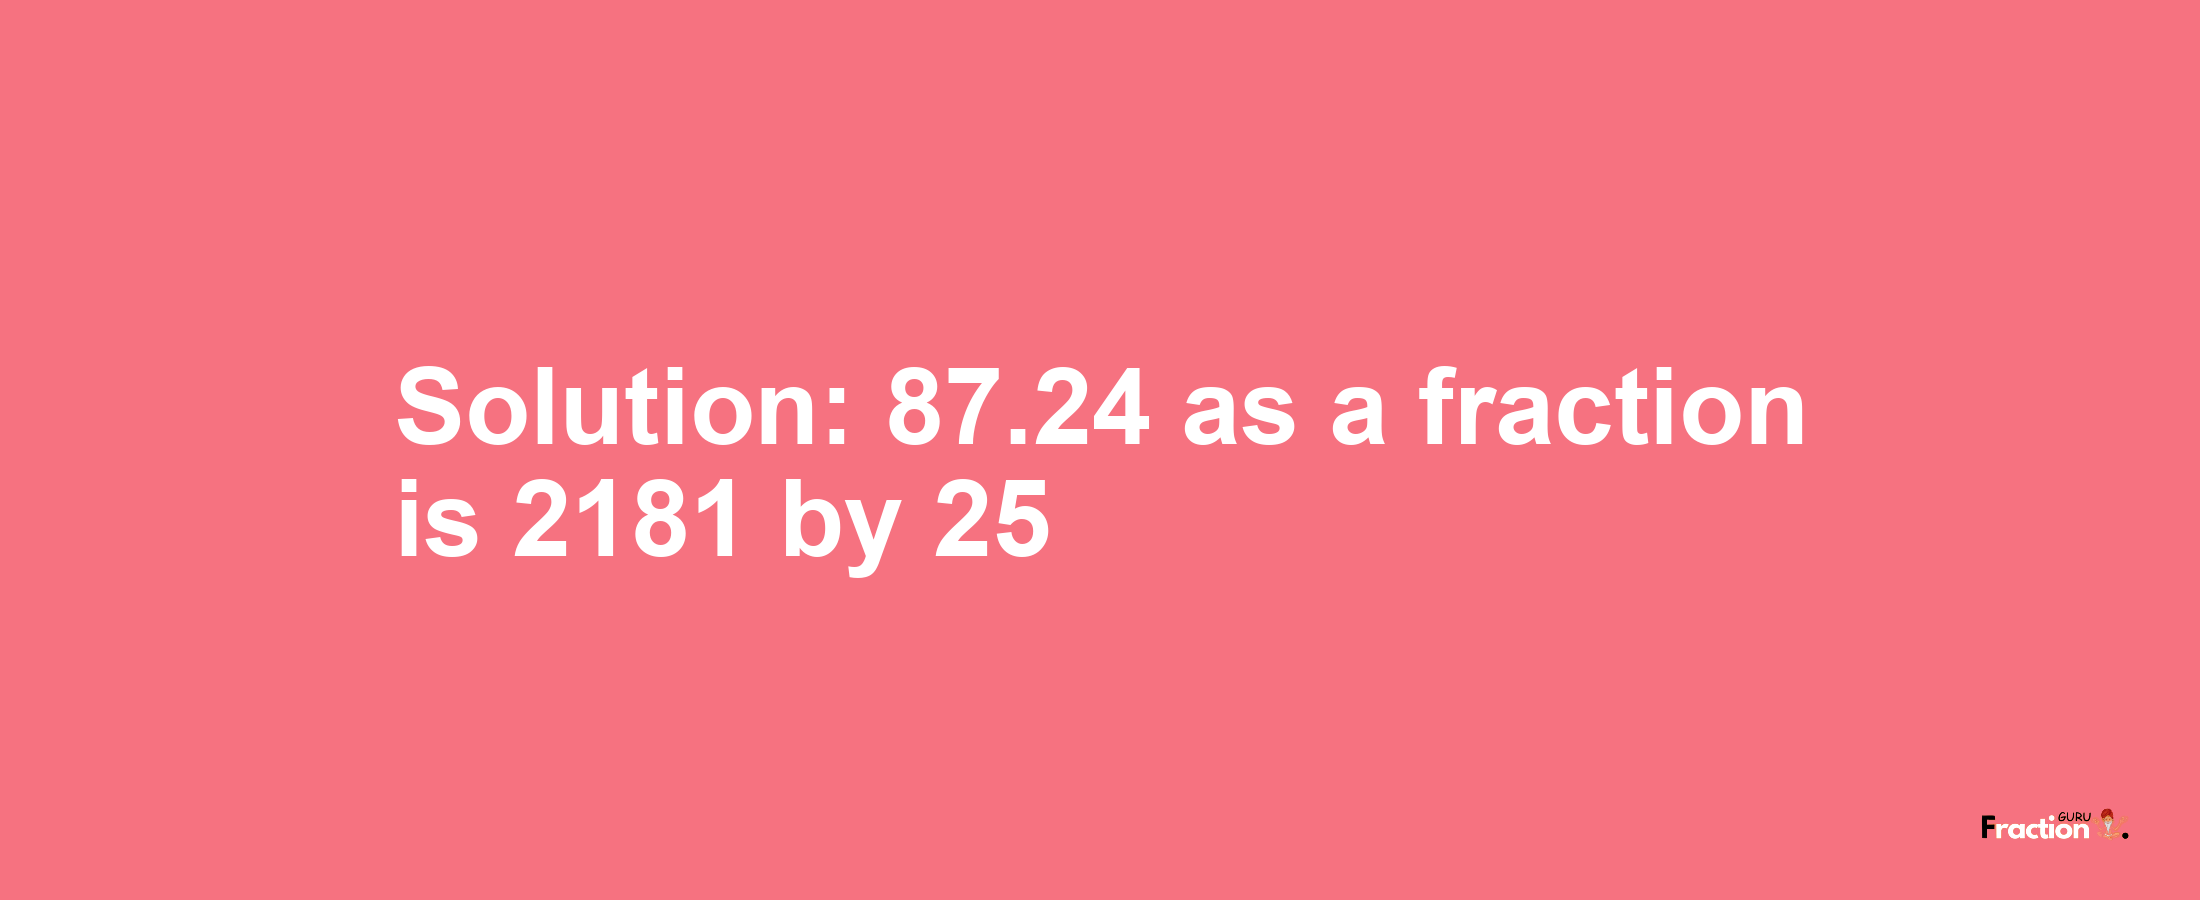 Solution:87.24 as a fraction is 2181/25